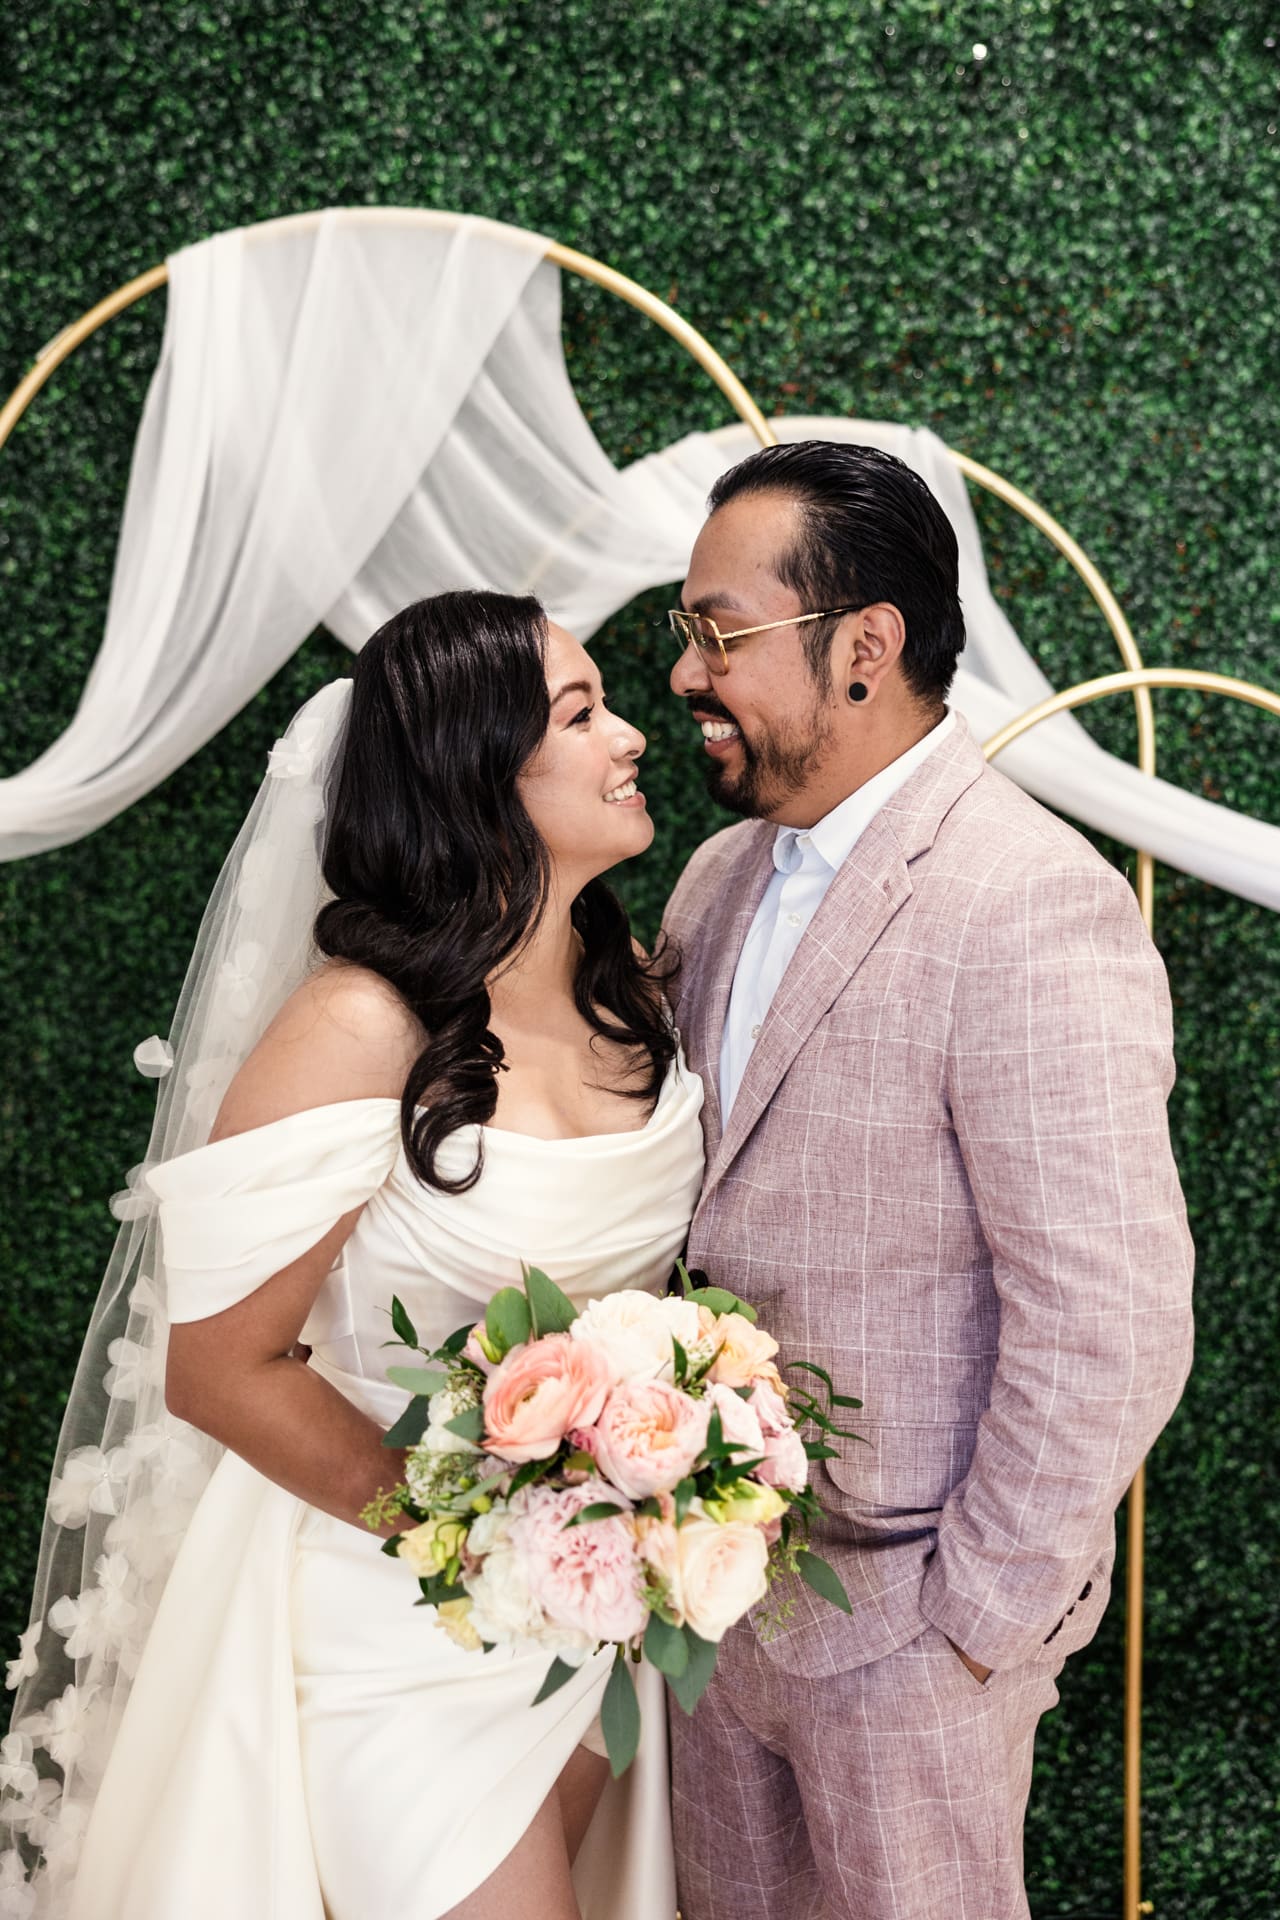 Candid photo of just married bride and groom smiling in front of gold arches and greenery wall after their intimate wedding ceremony at P&M Studio Chicago event space in West Town